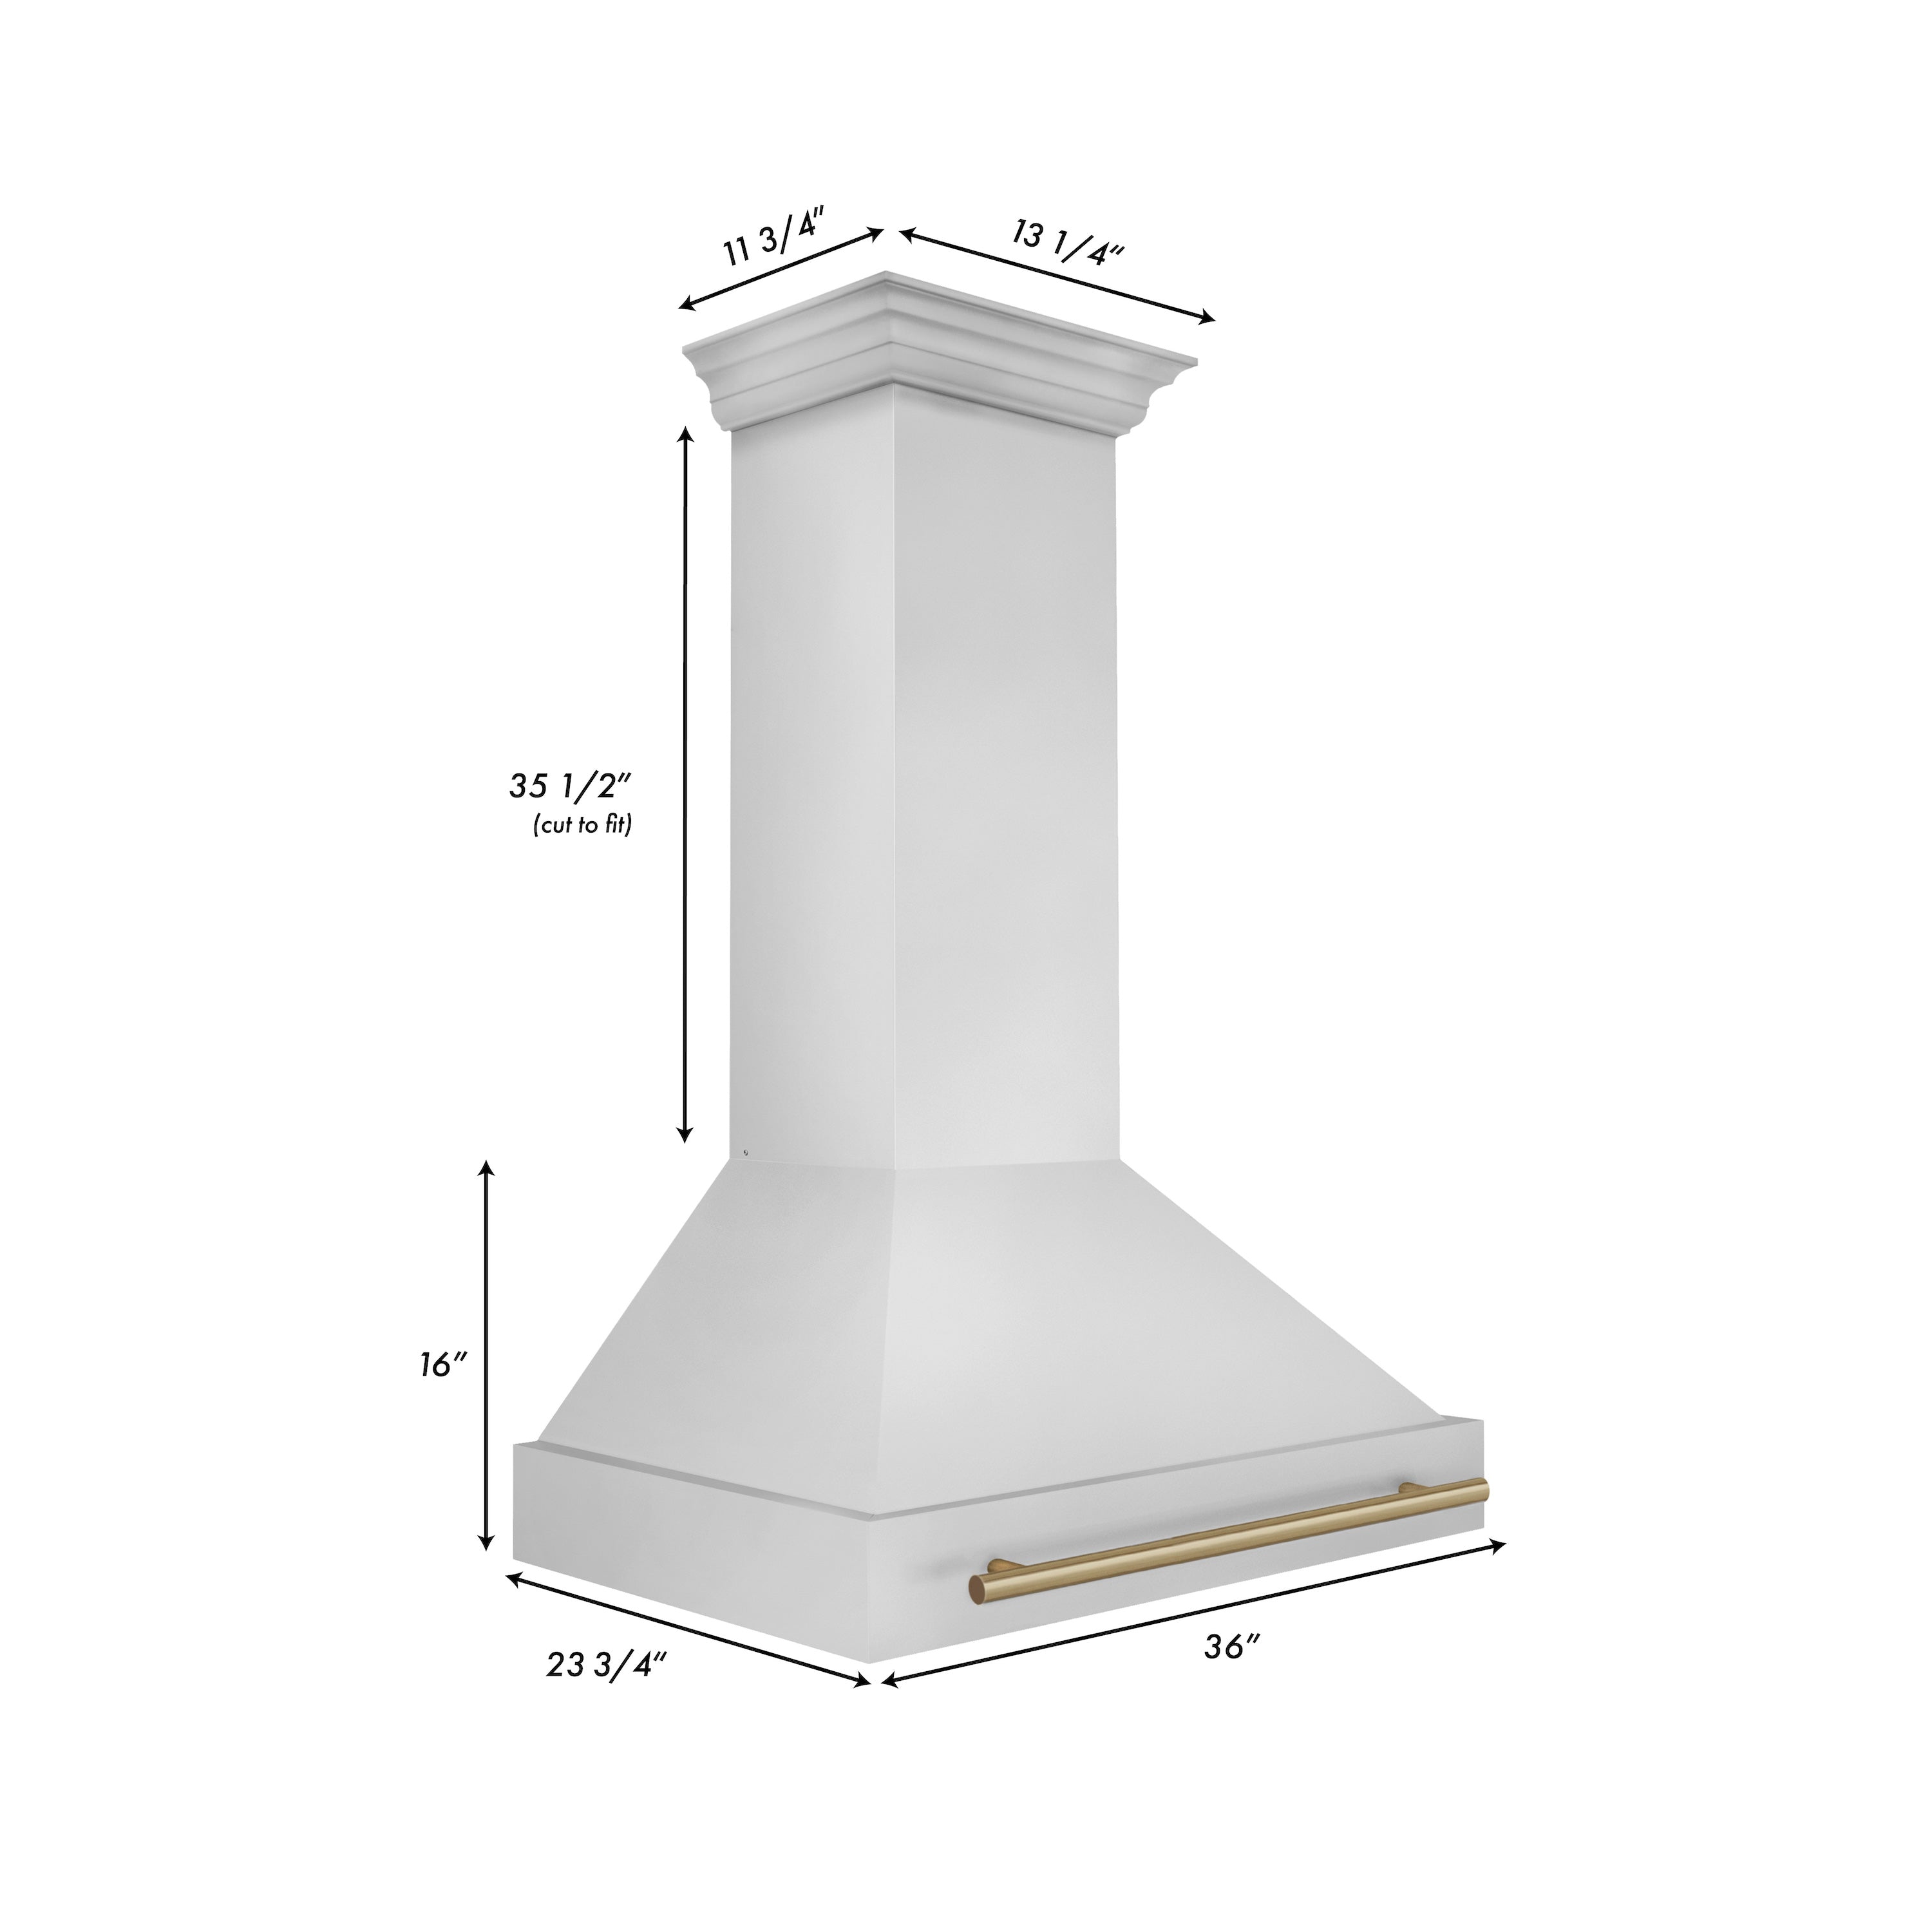 ZLINE Autograph Edition 36 in. Stainless Steel Range Hood with Champagne Bronze Handle dimensions.